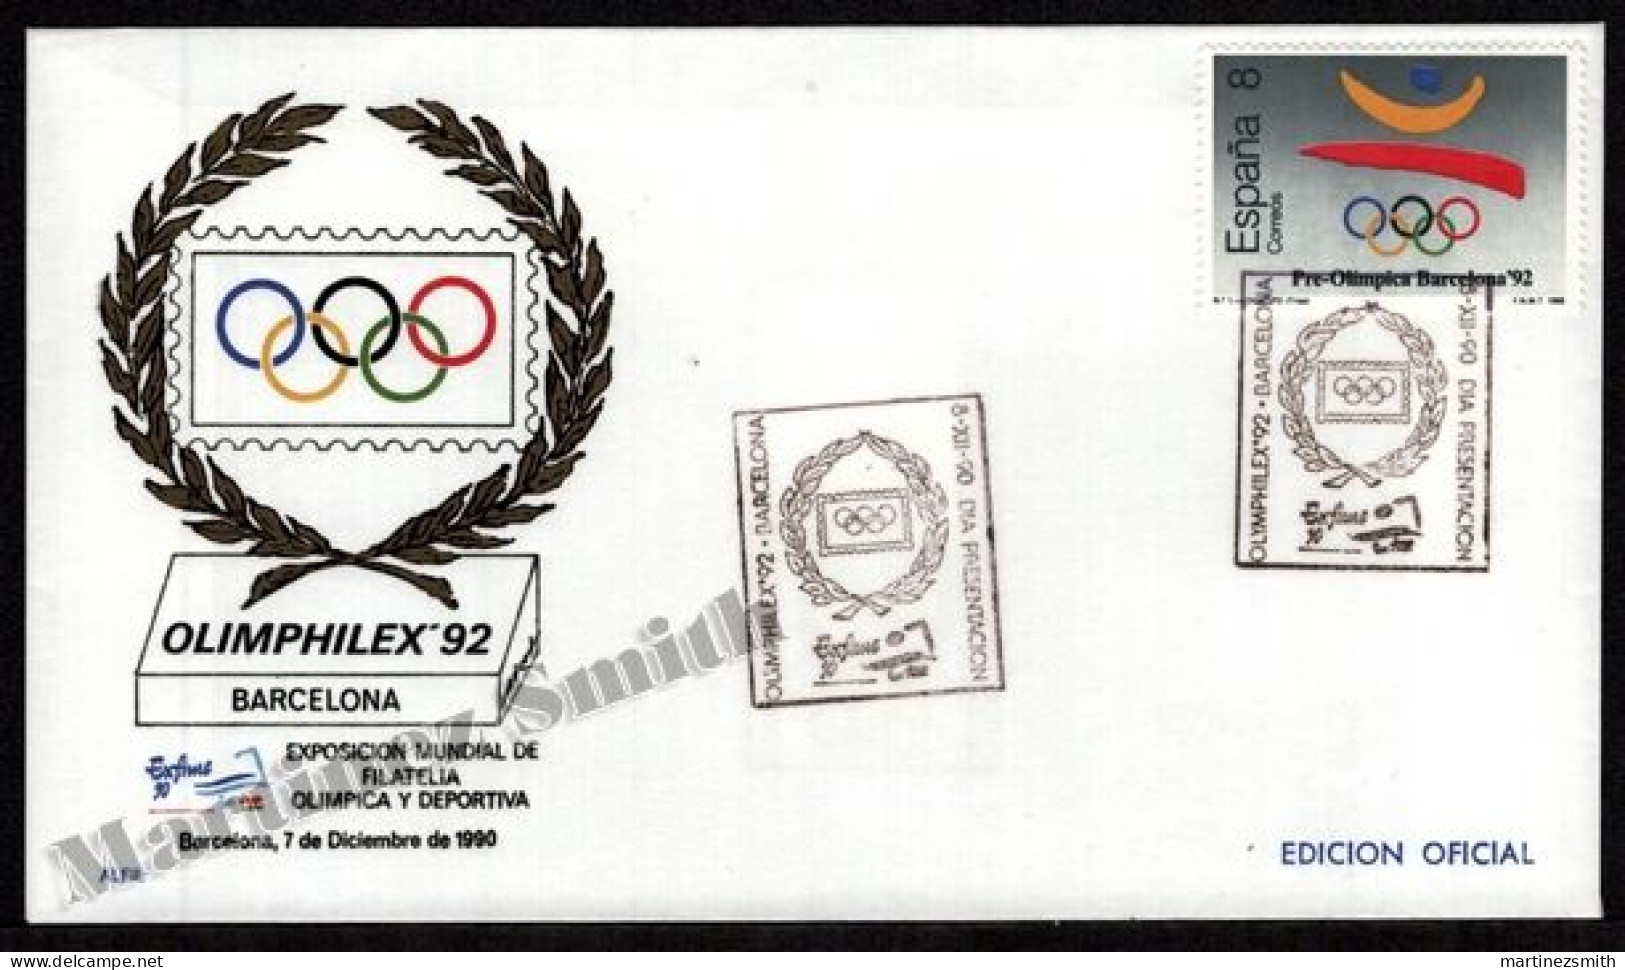 Olimphilex '92 Barcelona 1992 Olympics Games Cover Laurel Olympic Rings - Oficial Exposition Edition 1990 - Summer 1992: Barcelona